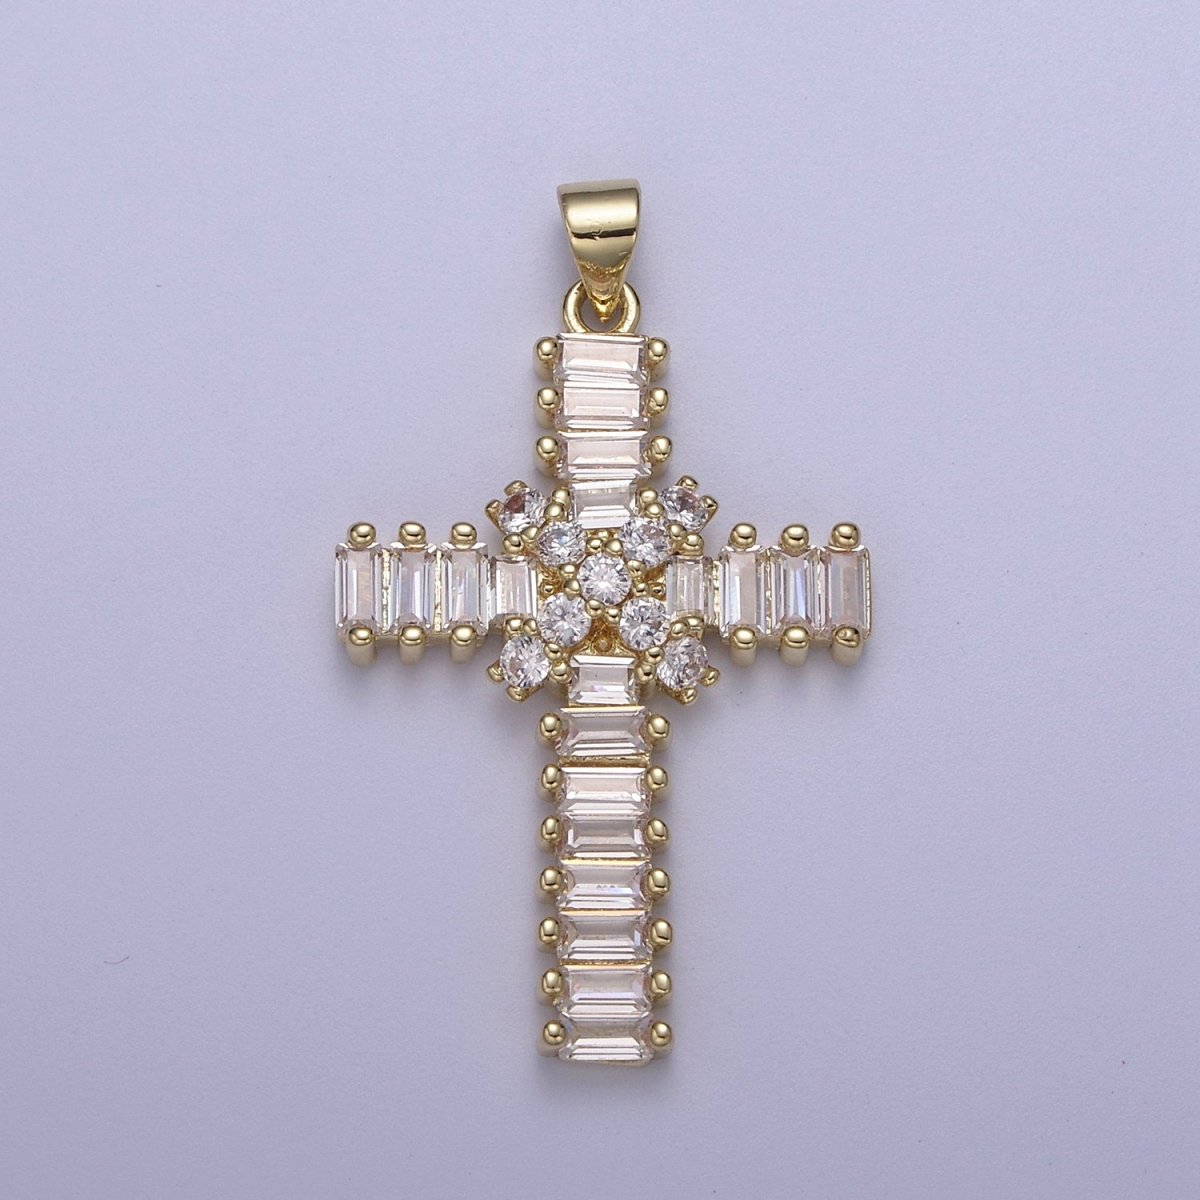 Clear Baguette Cubic Zirconia Cross Pendant, 14K Gold Filled Christian Catholic Supply For DIY Jewelry Making H-777 - DLUXCA